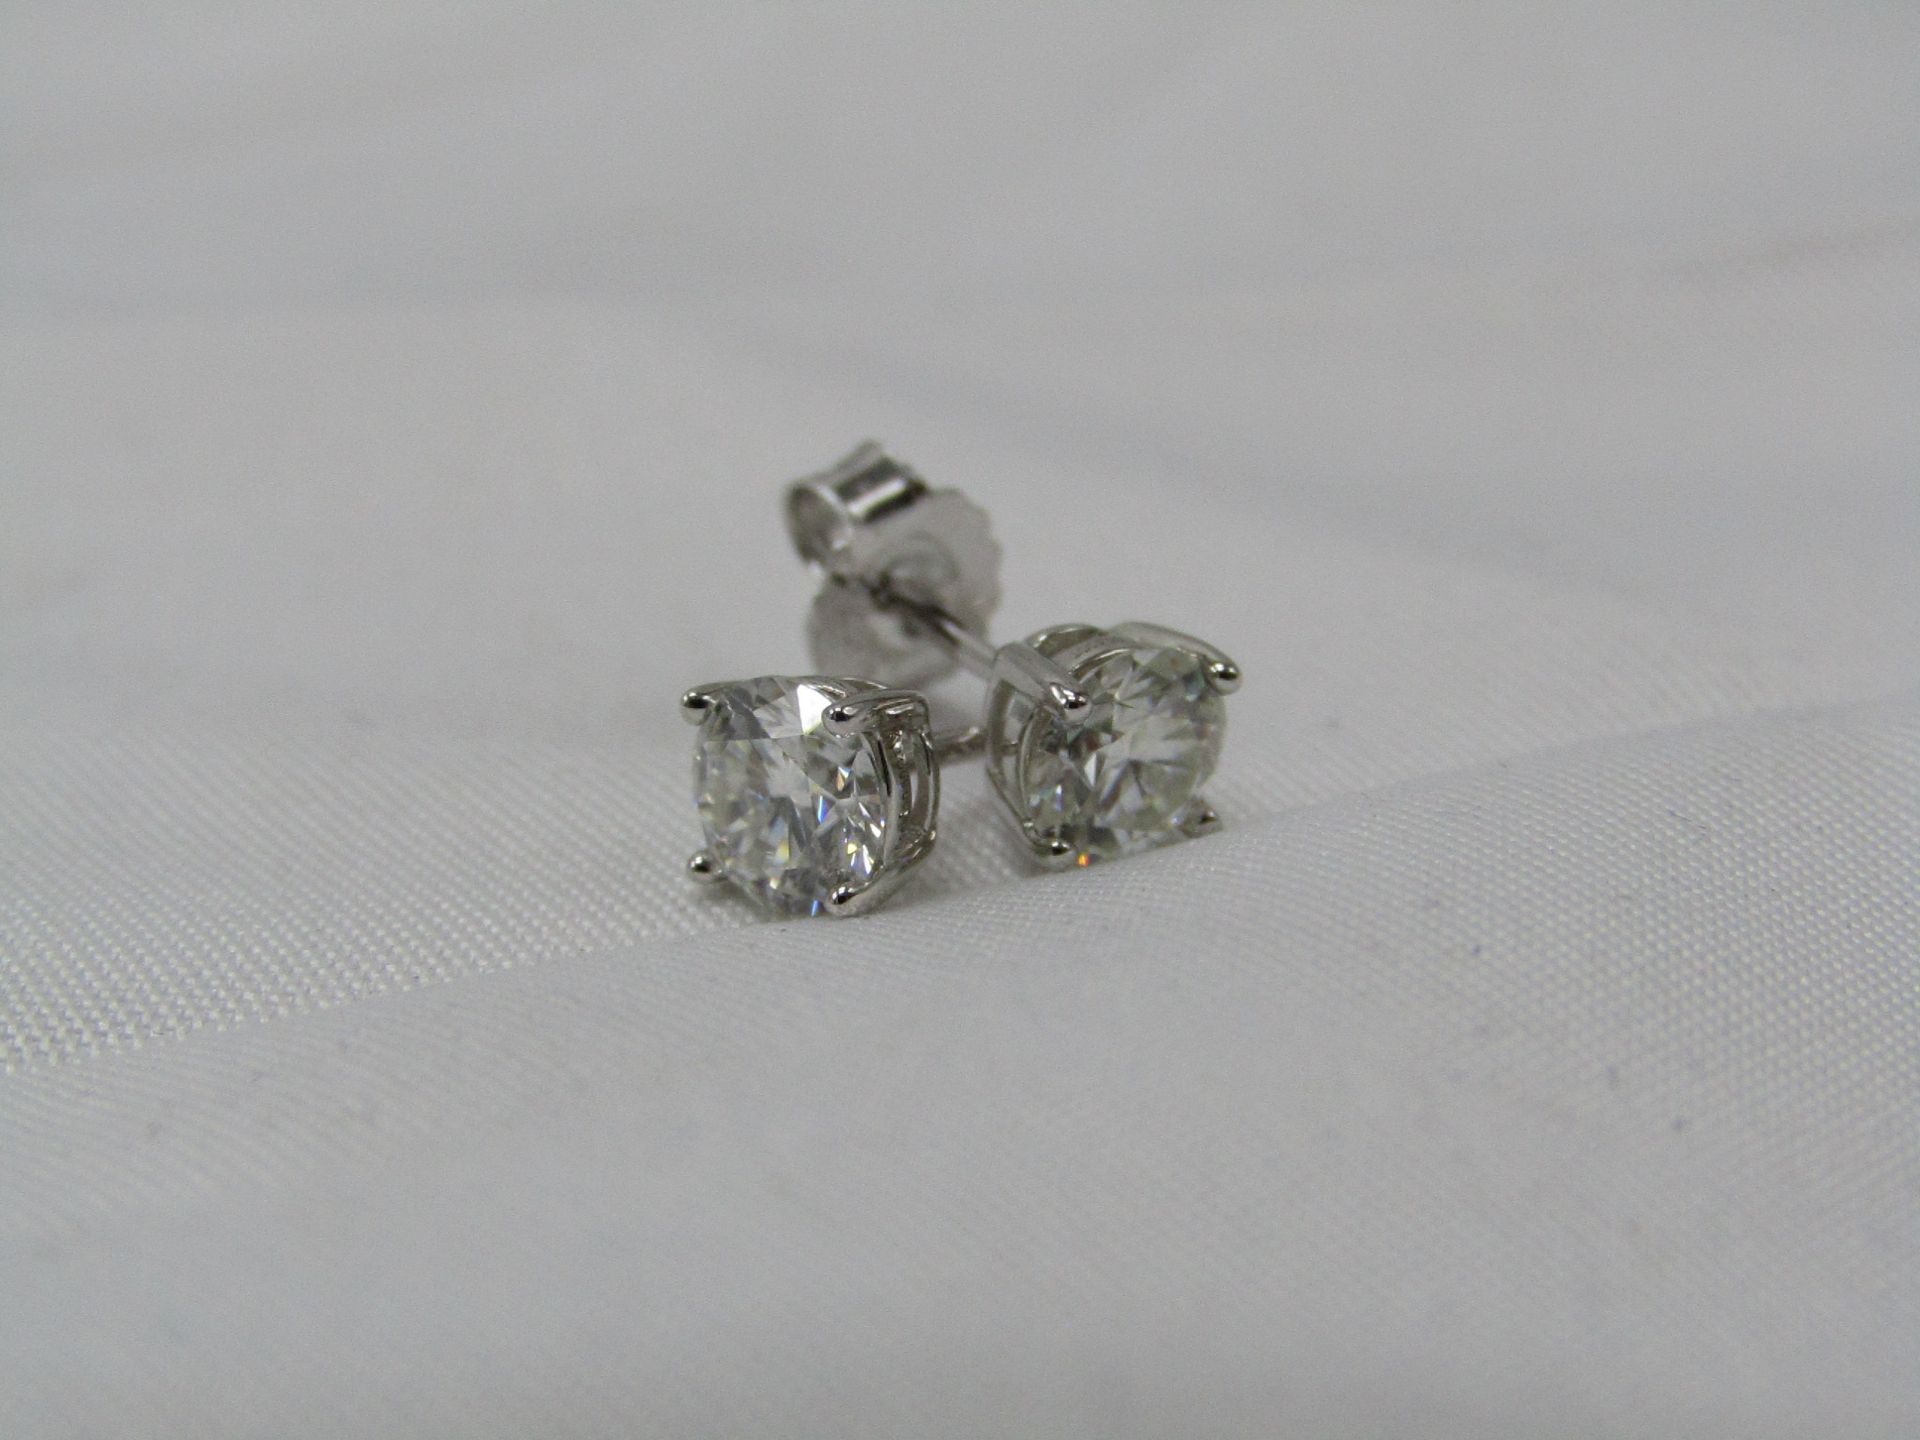 0.5 Carat Round Brilliant Cut Moissanite stone in a 925 Silver setting earrings, new and comes